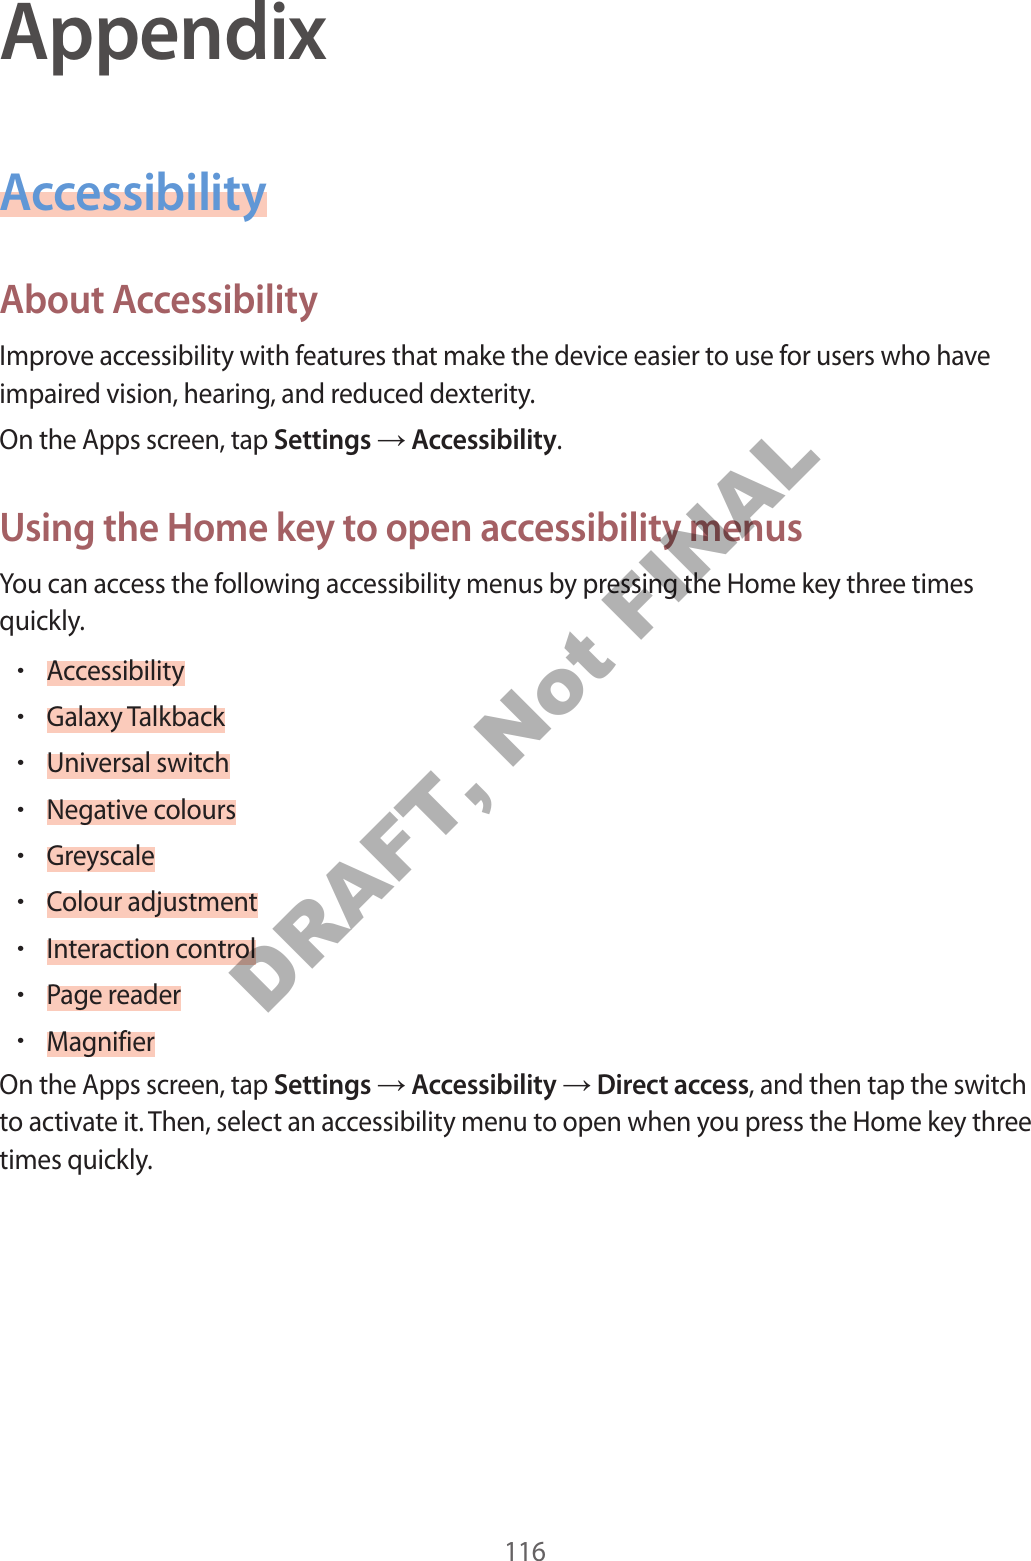 116AppendixAccessibilityAbout AccessibilityImprove accessibility with features that make the device easier to use for users who have impaired vision, hearing, and reduced dexterity.On the Apps screen, tap Settings → Accessibility.Using the Home key to open accessibility menusYou can access the following accessibility menus by pressing the Home key three times quickly.•Accessibility•Galaxy Talkback•Universal switch•Negative colours•Greyscale•Colour adjustment•Interaction control•Page reader•MagnifierOn the Apps screen, tap Settings → Accessibility → Direct access, and then tap the switch to activate it. Then, select an accessibility menu to open when you press the Home key three times quickly.DRAFT, Not FINAL